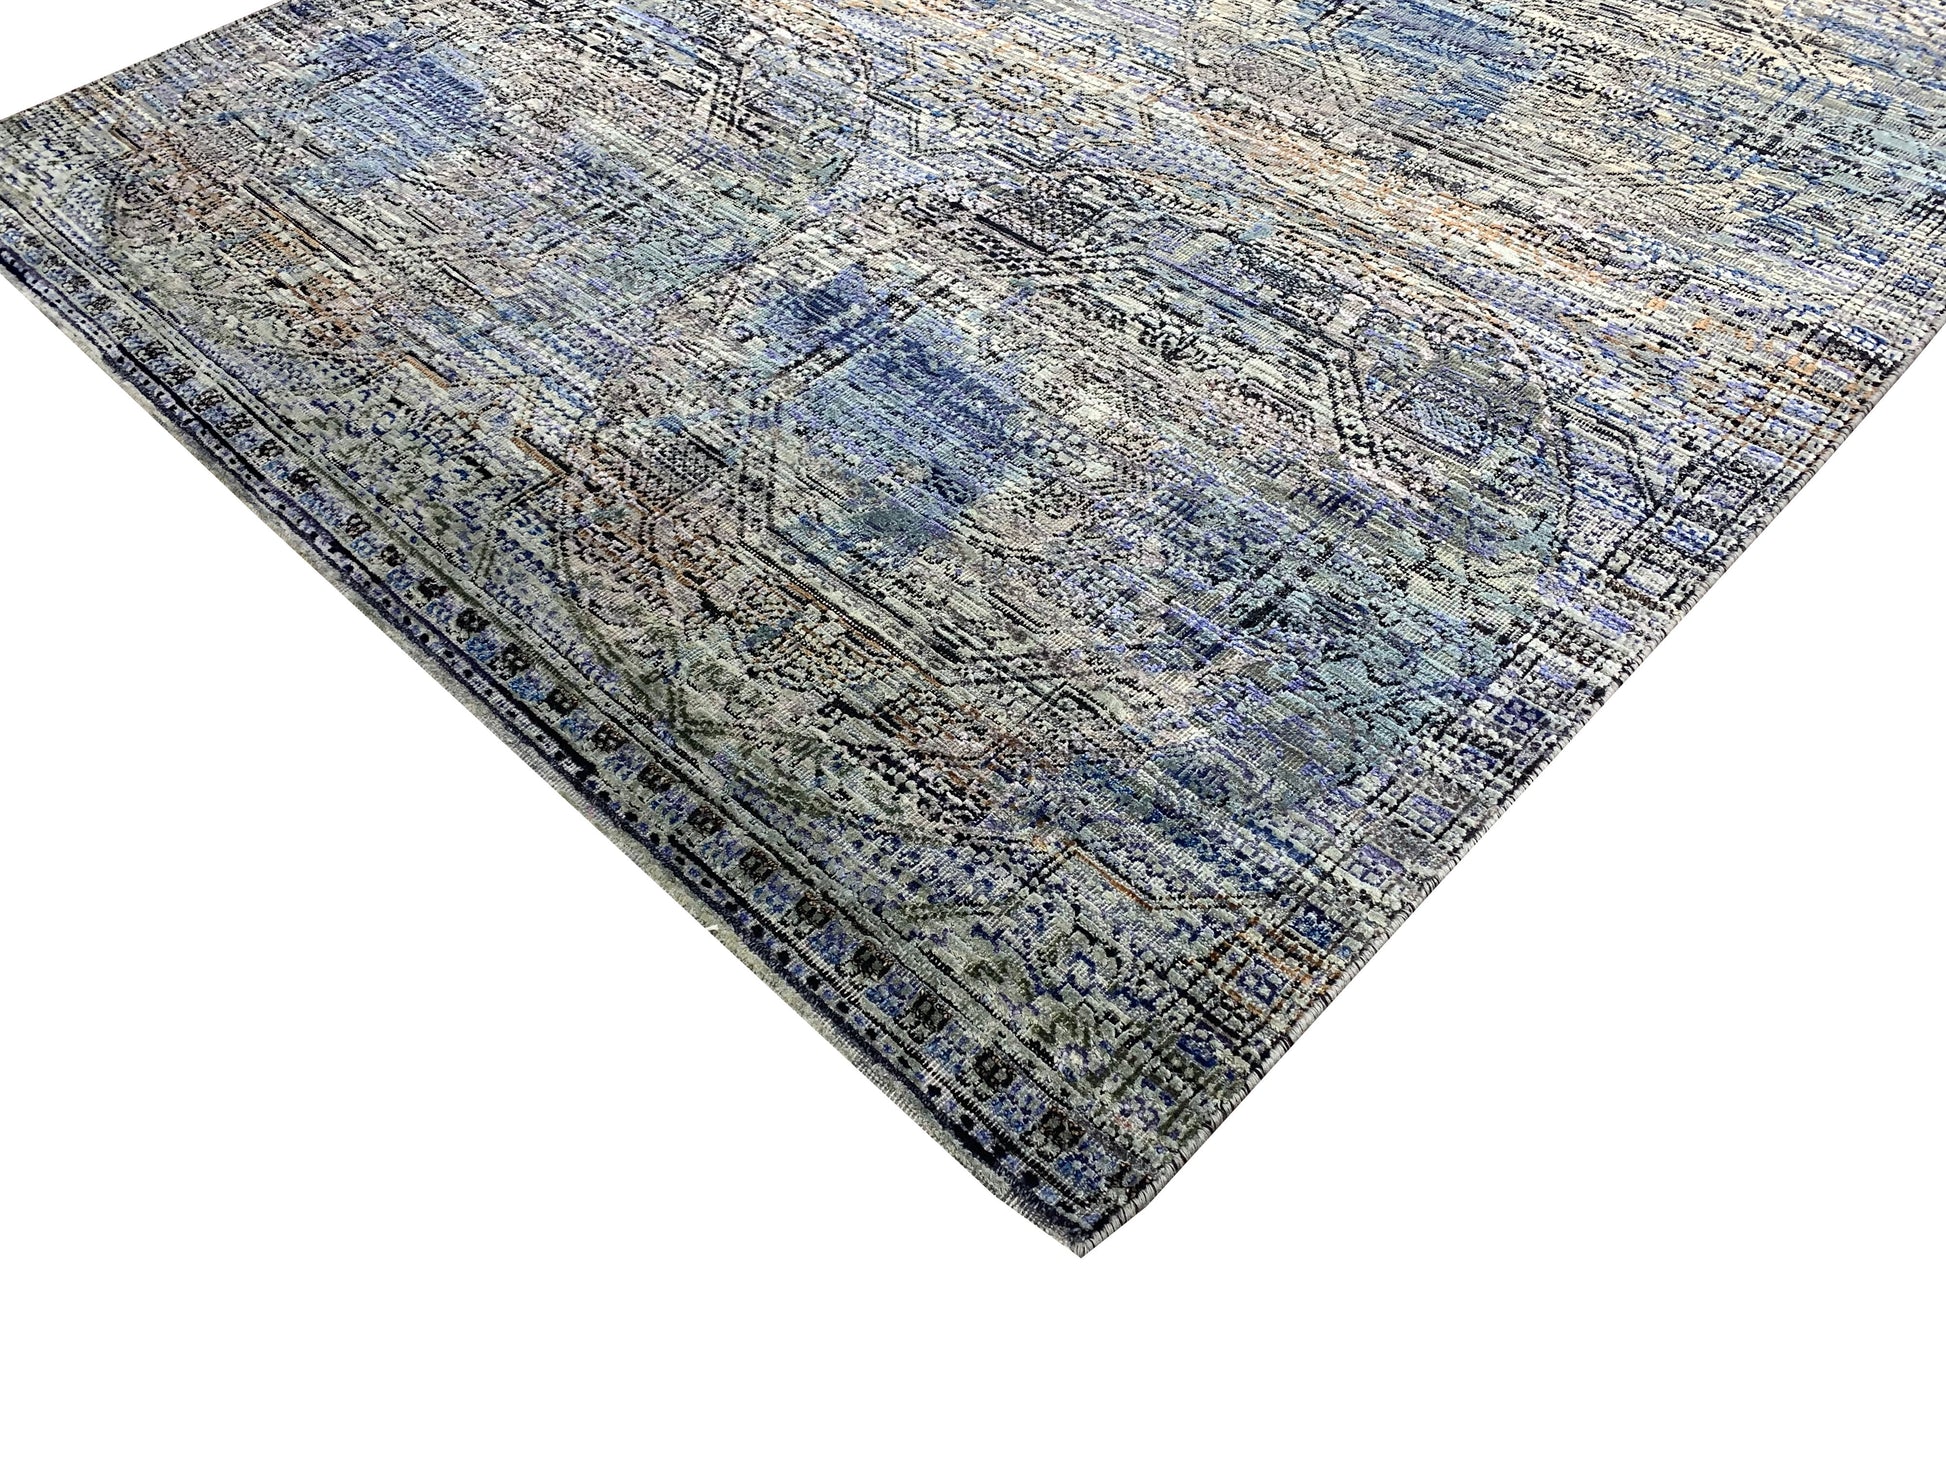 Get trendy with Blue Multi Silk, Wool Modern Area Rug 4.10x7.0ft 148x214Cms - Modern Rugs available at Jaipur Oriental Rugs. Grab yours for $3045.00 today!